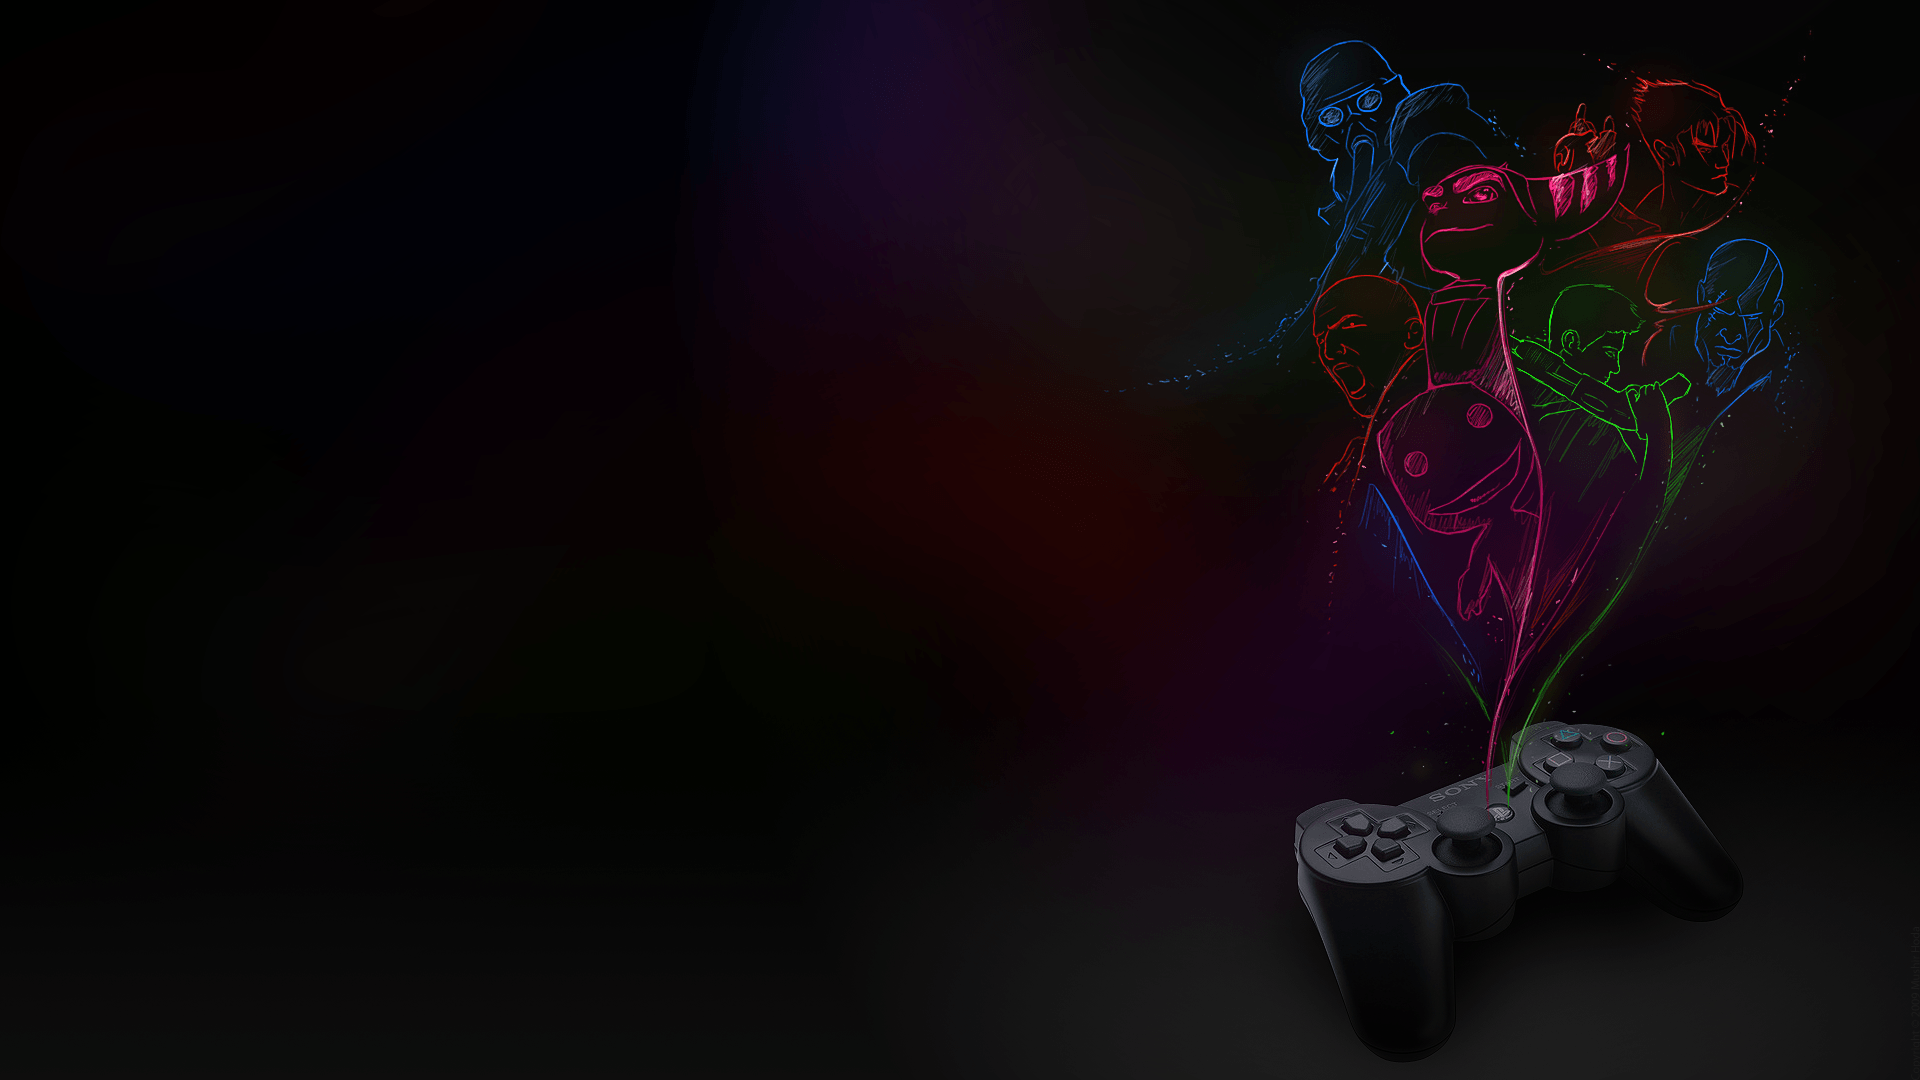 Playstation HD Wallpaper and Background Image